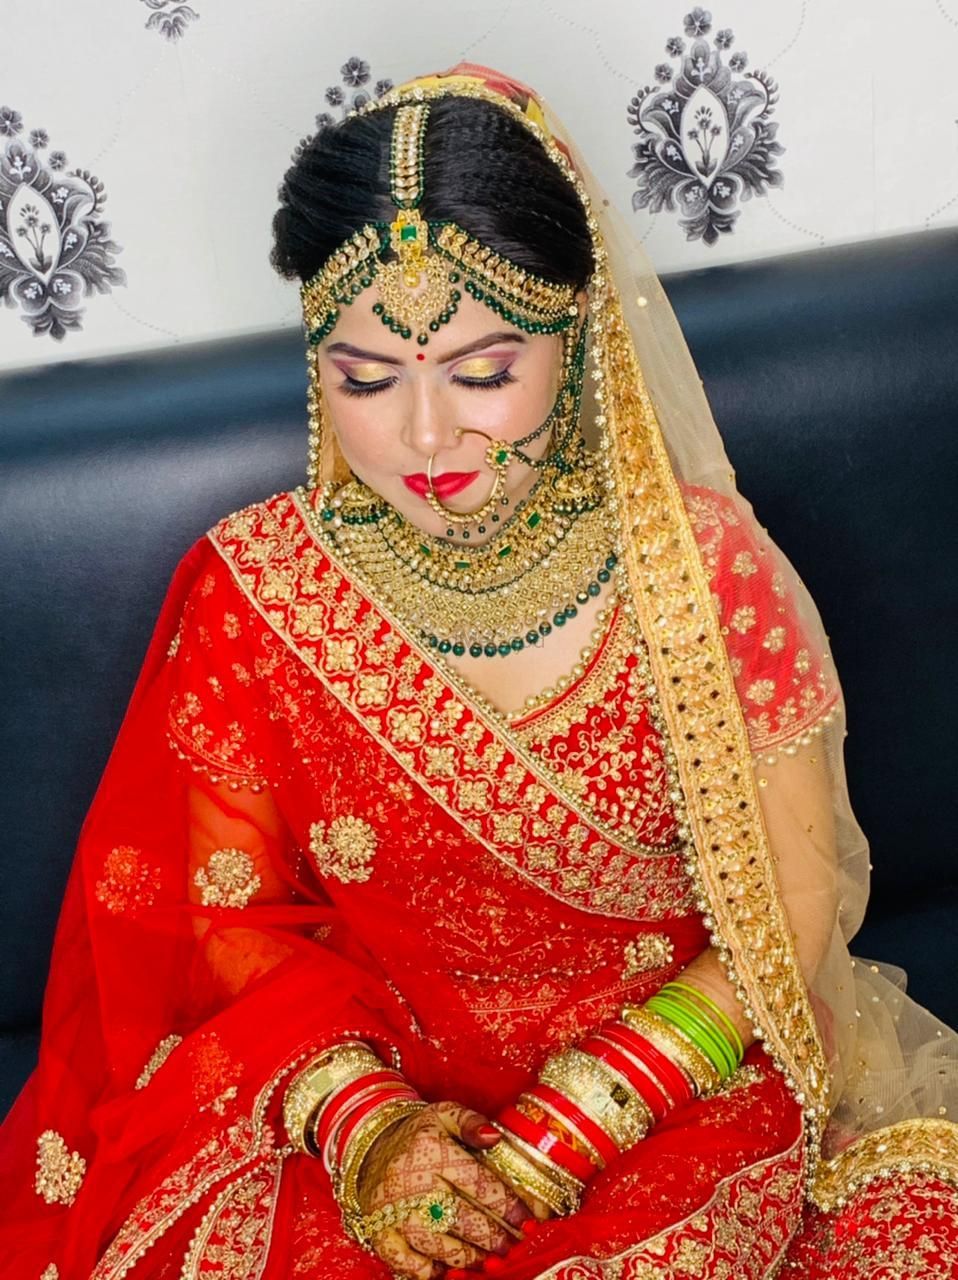 Photo By Style Of India - Bridal Makeup